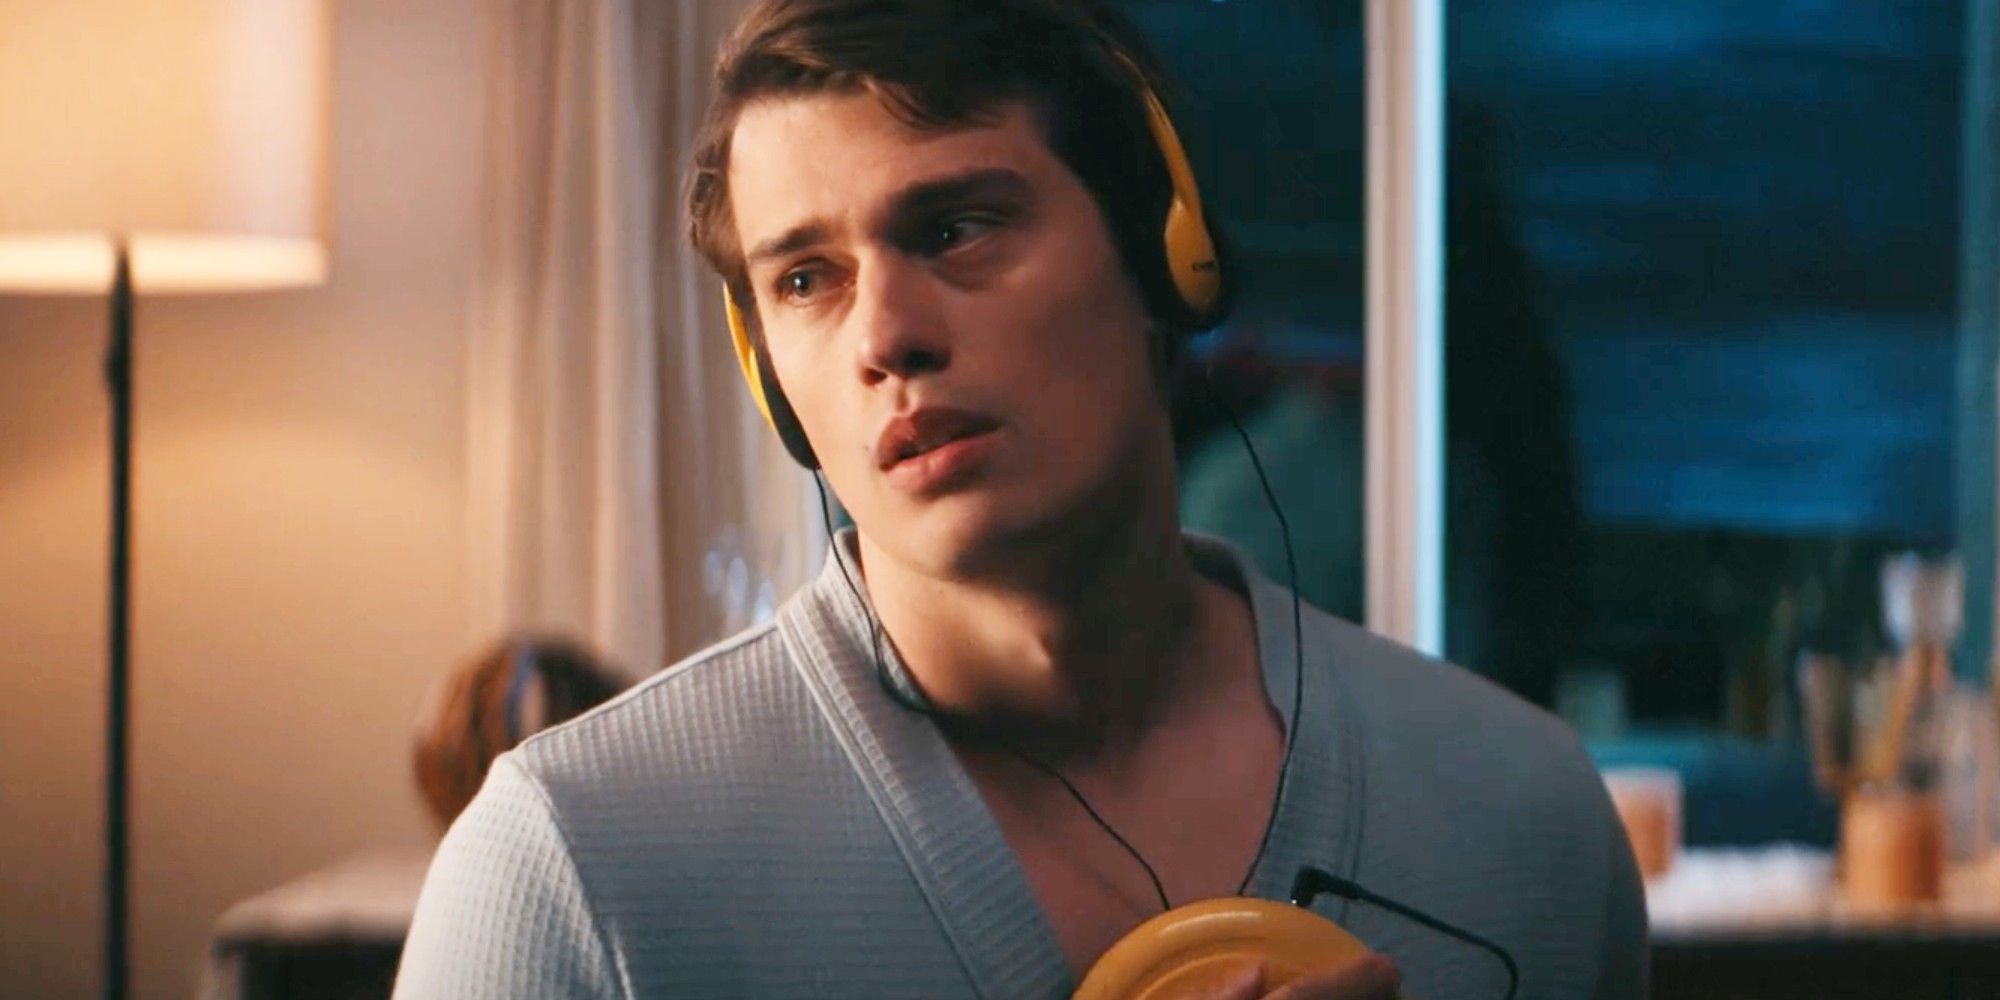 Nicholas Galitzine as Jeff listens to a song on his Walkman with his wire headphones in Bottoms